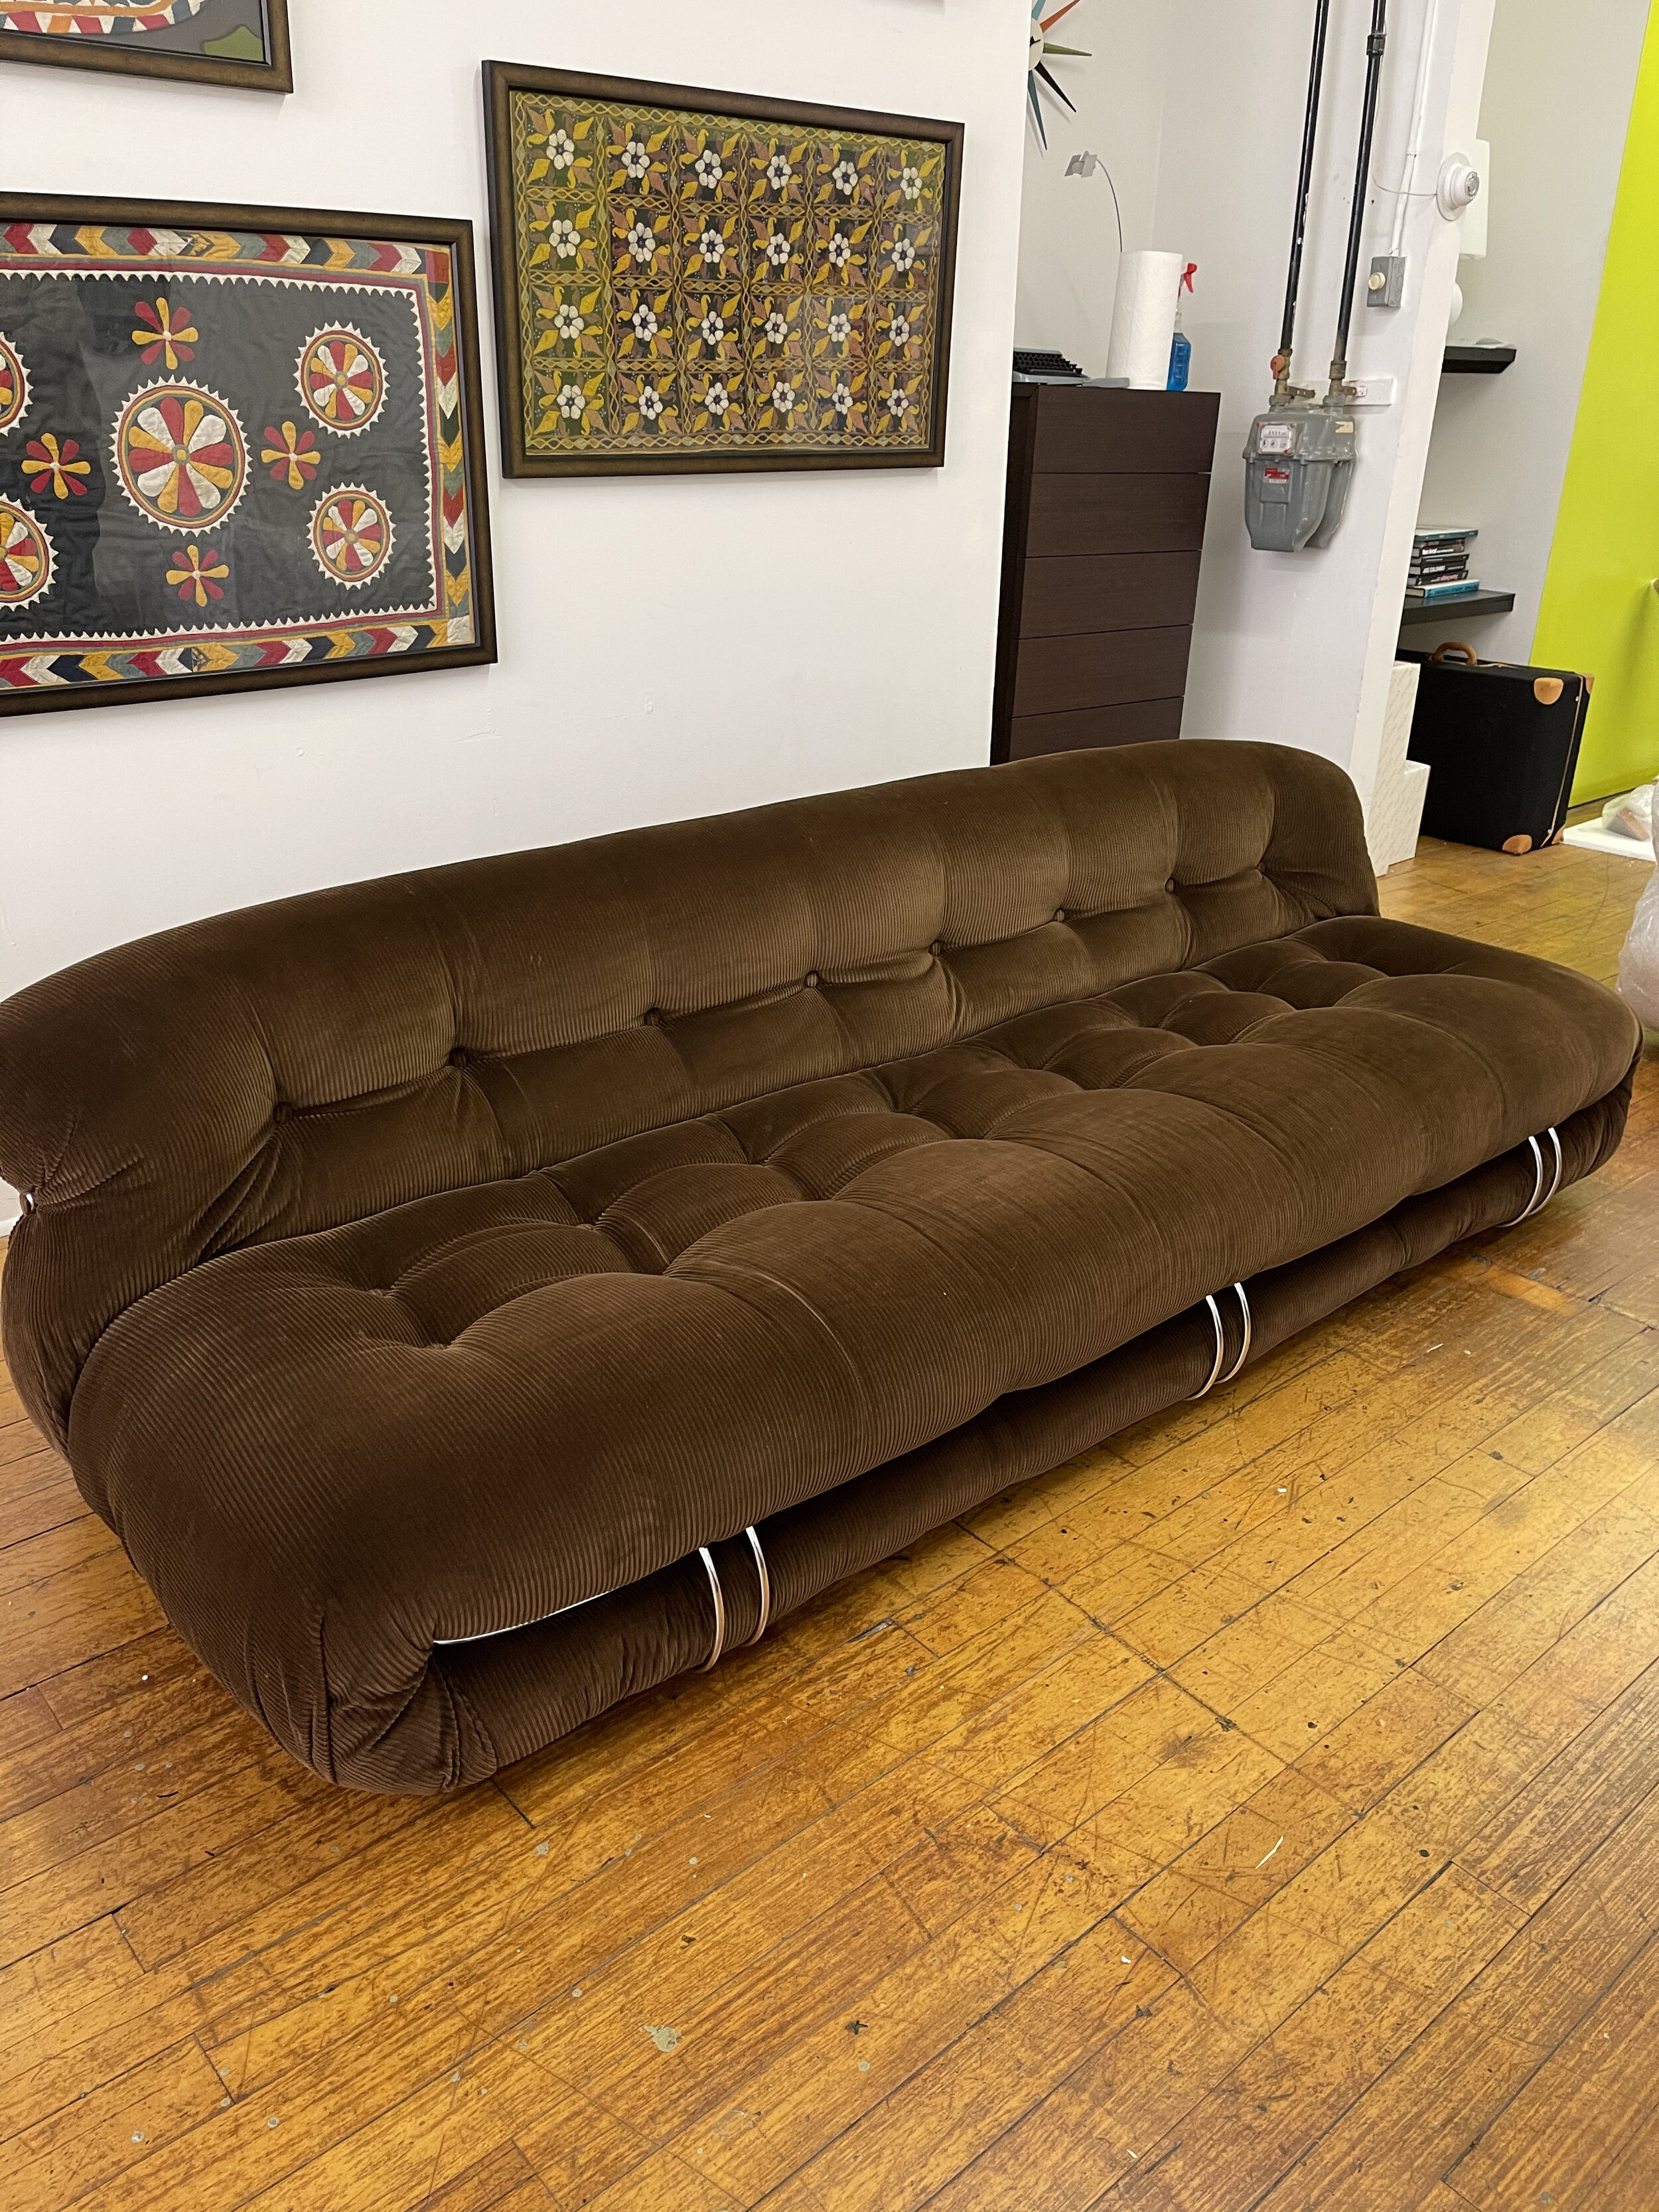 Vintage Soriana Sofa Large Dark Brown Fabric by Tobia Scarpa | front angled view